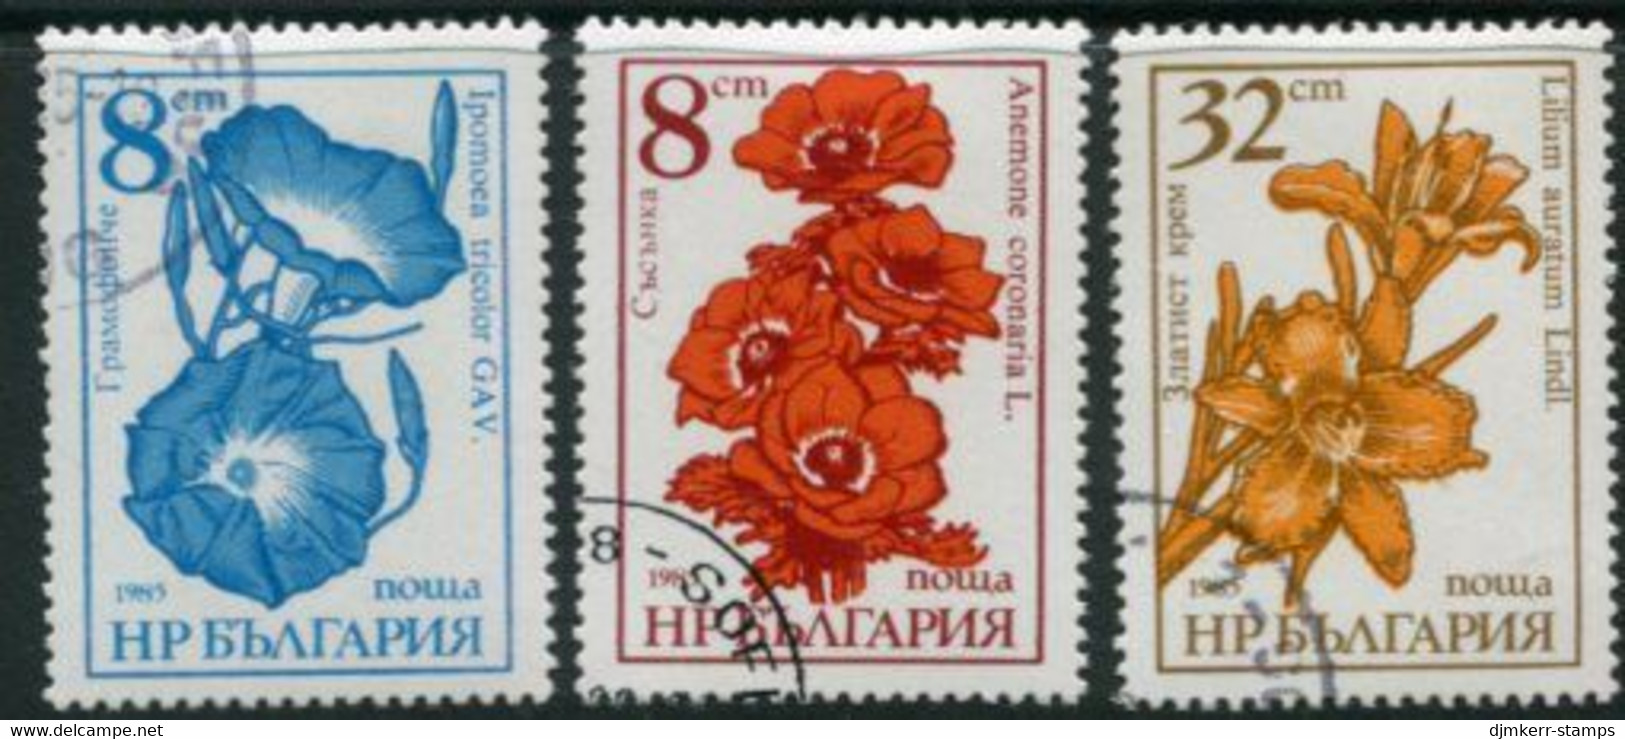 BULGARIA 1986 Garden Flowers Used.  Michel 3489-91 - Used Stamps